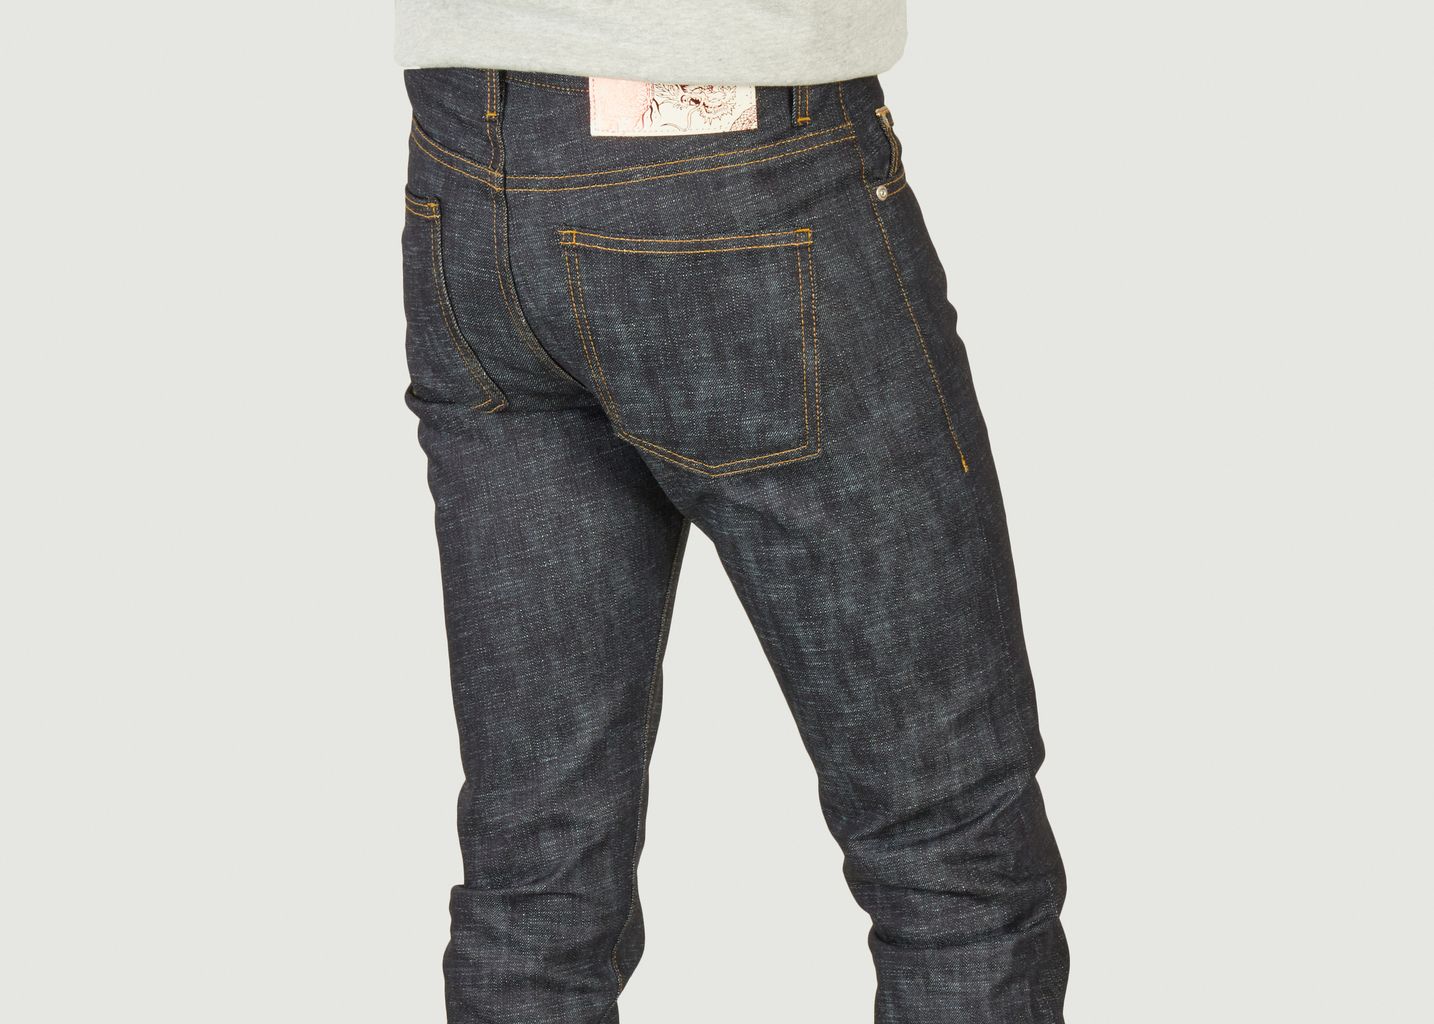 Jean Super Guy Chinese New Year 12.5oz - Naked and Famous